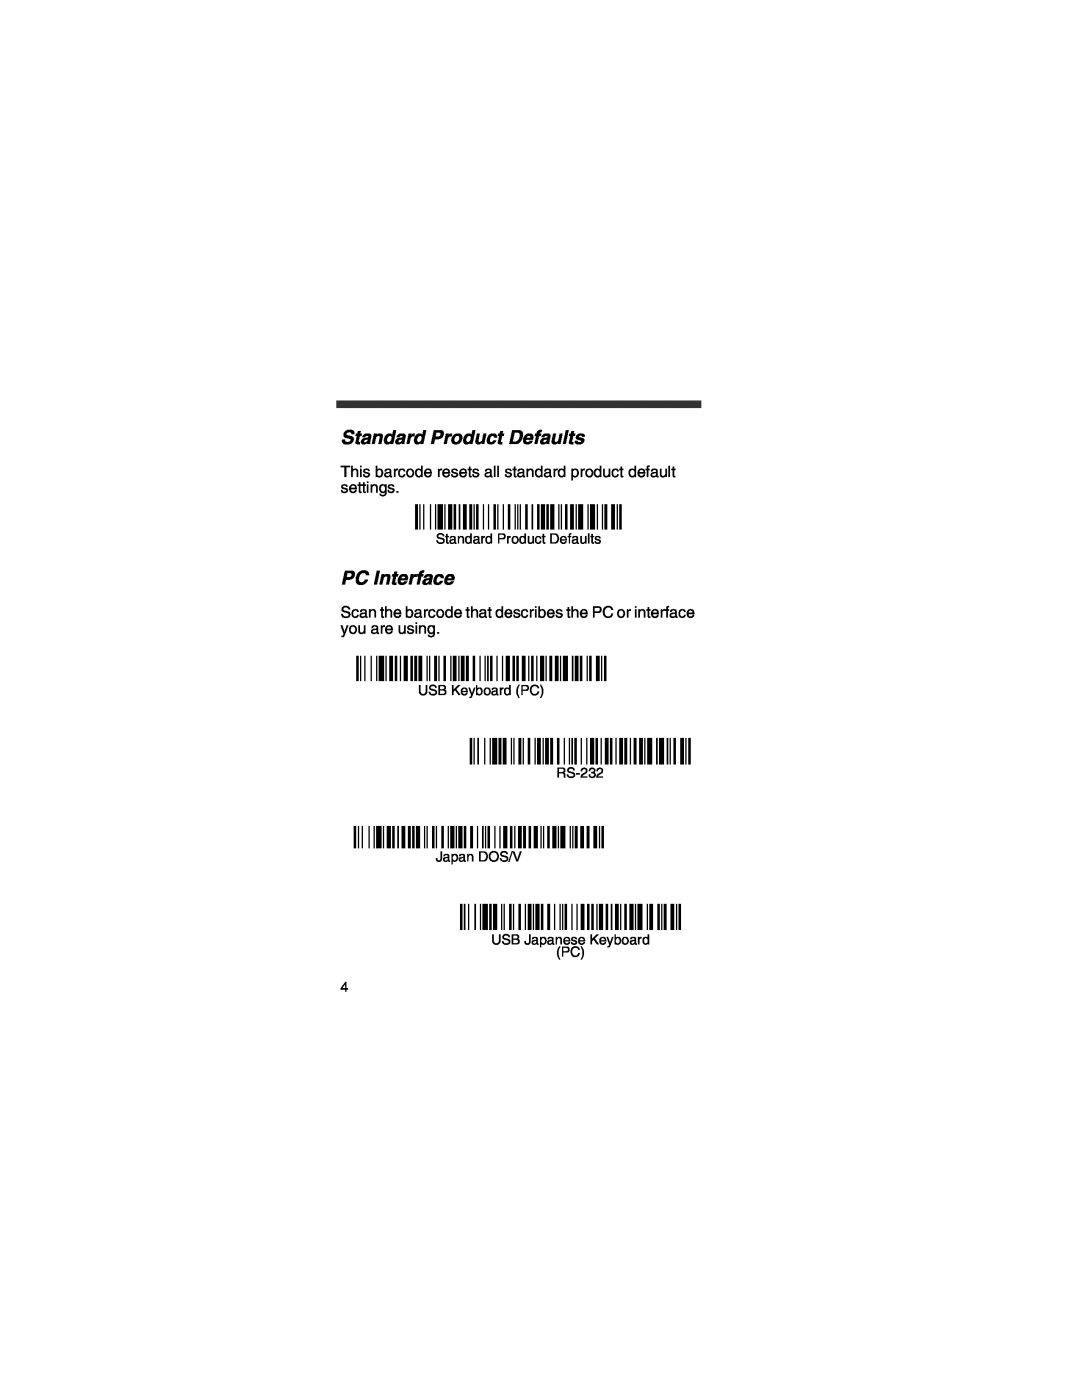 Honeywell 3820i, 4820 Standard Product Defaults, PC Interface, This barcode resets all standard product default settings 